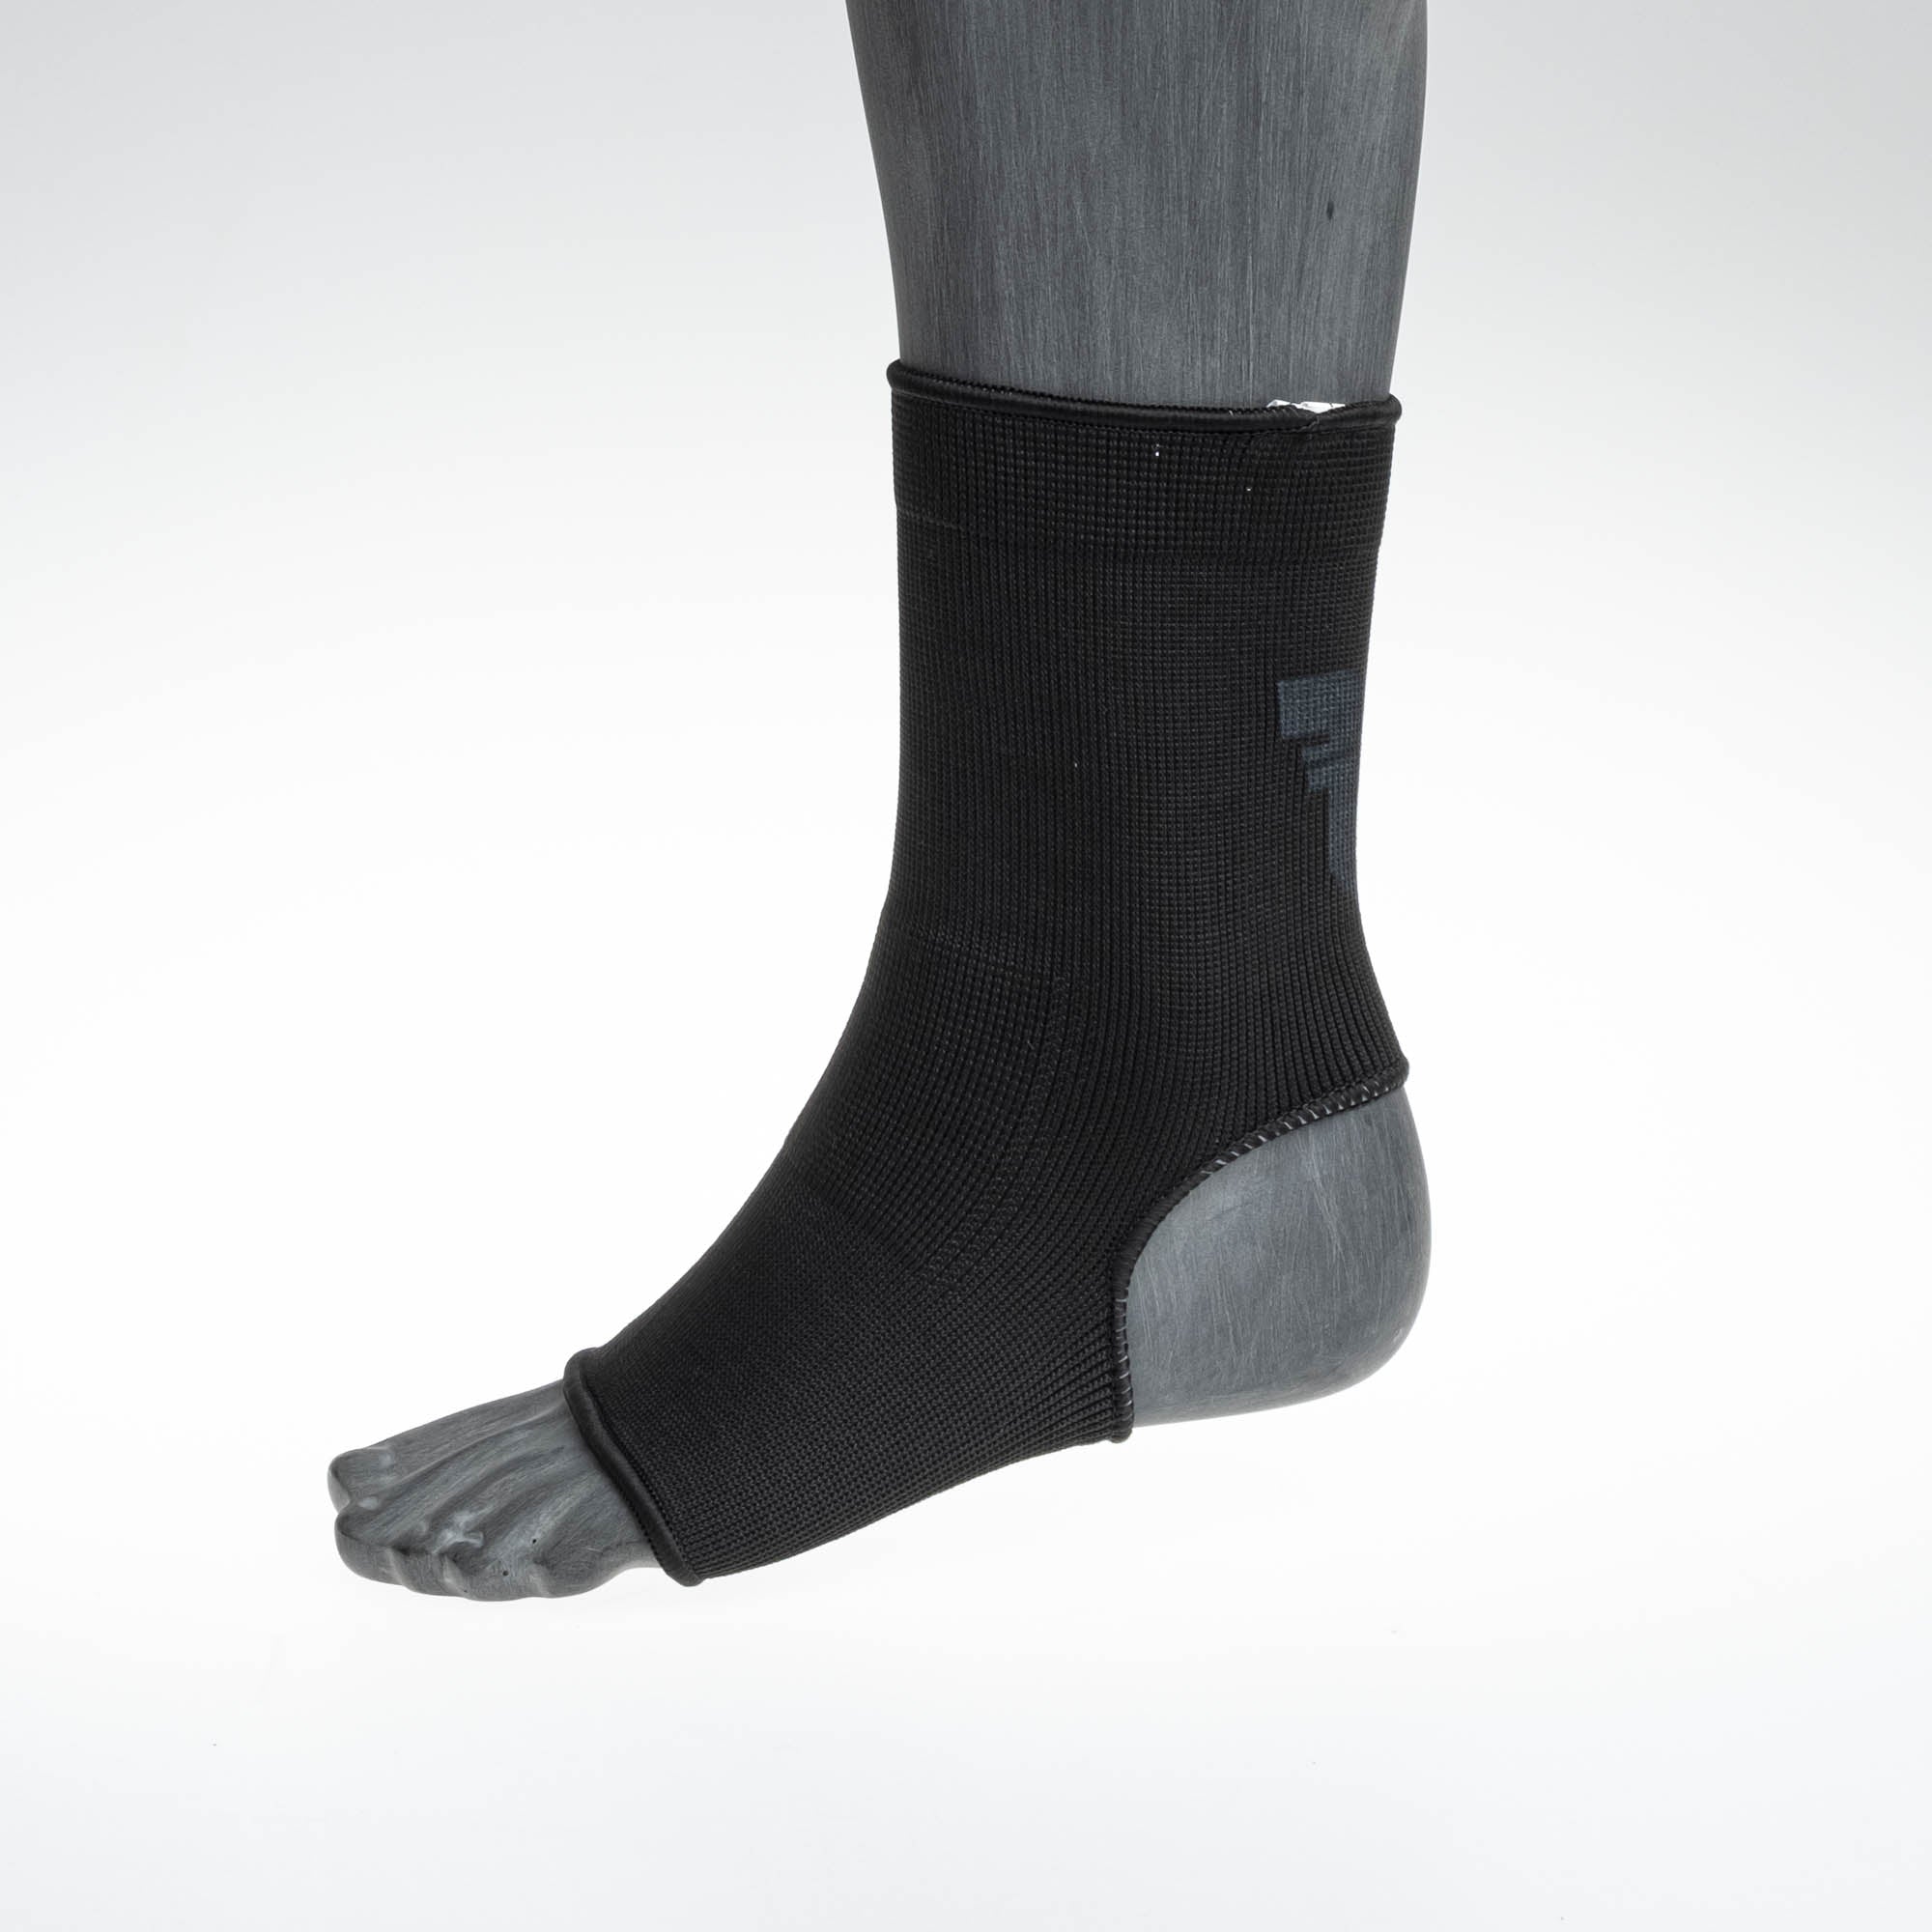 Fighter Ankle Support - black, FAS-08